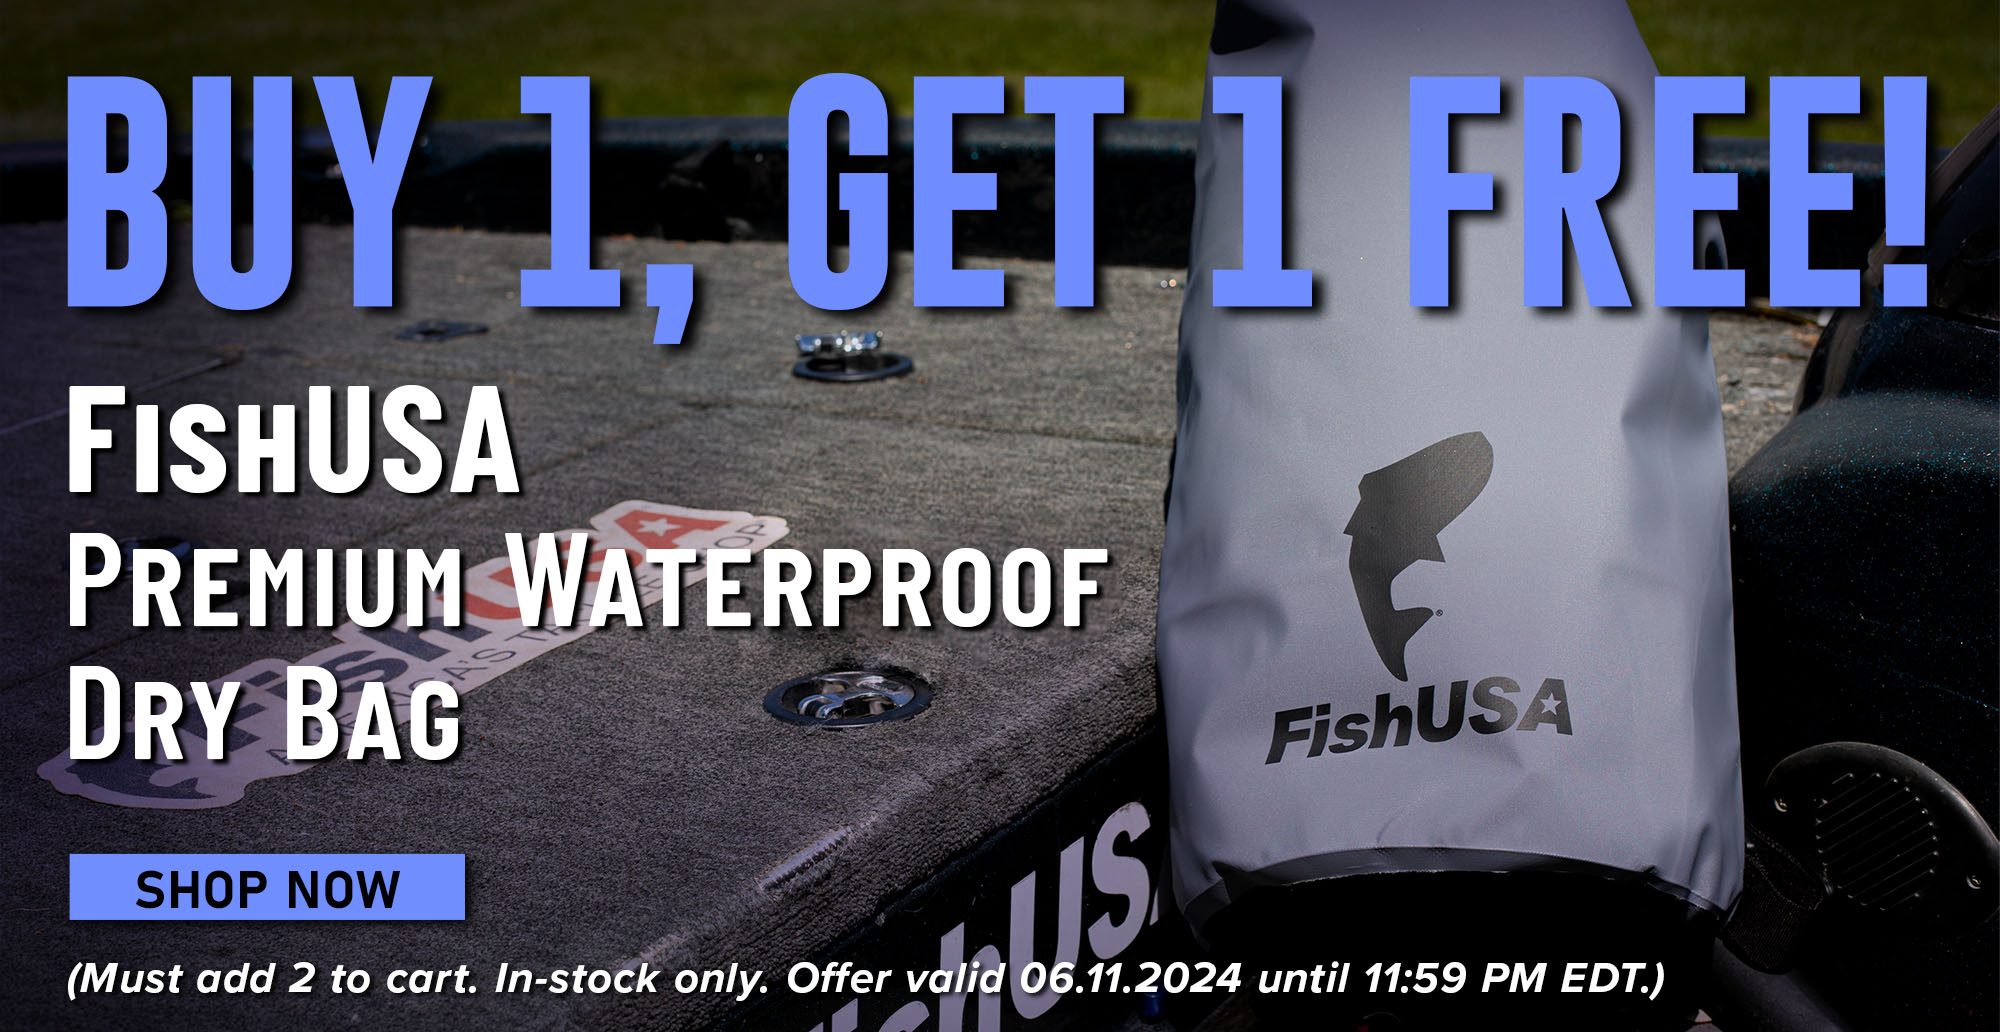 Buy 1, Get 1 Free! FishUSA Premum Waterproof Dry Bag Shop Now (Must add 2 to cart. In-stock only. Offer valid 06.11.2024 until 11:59 PM EDT.)